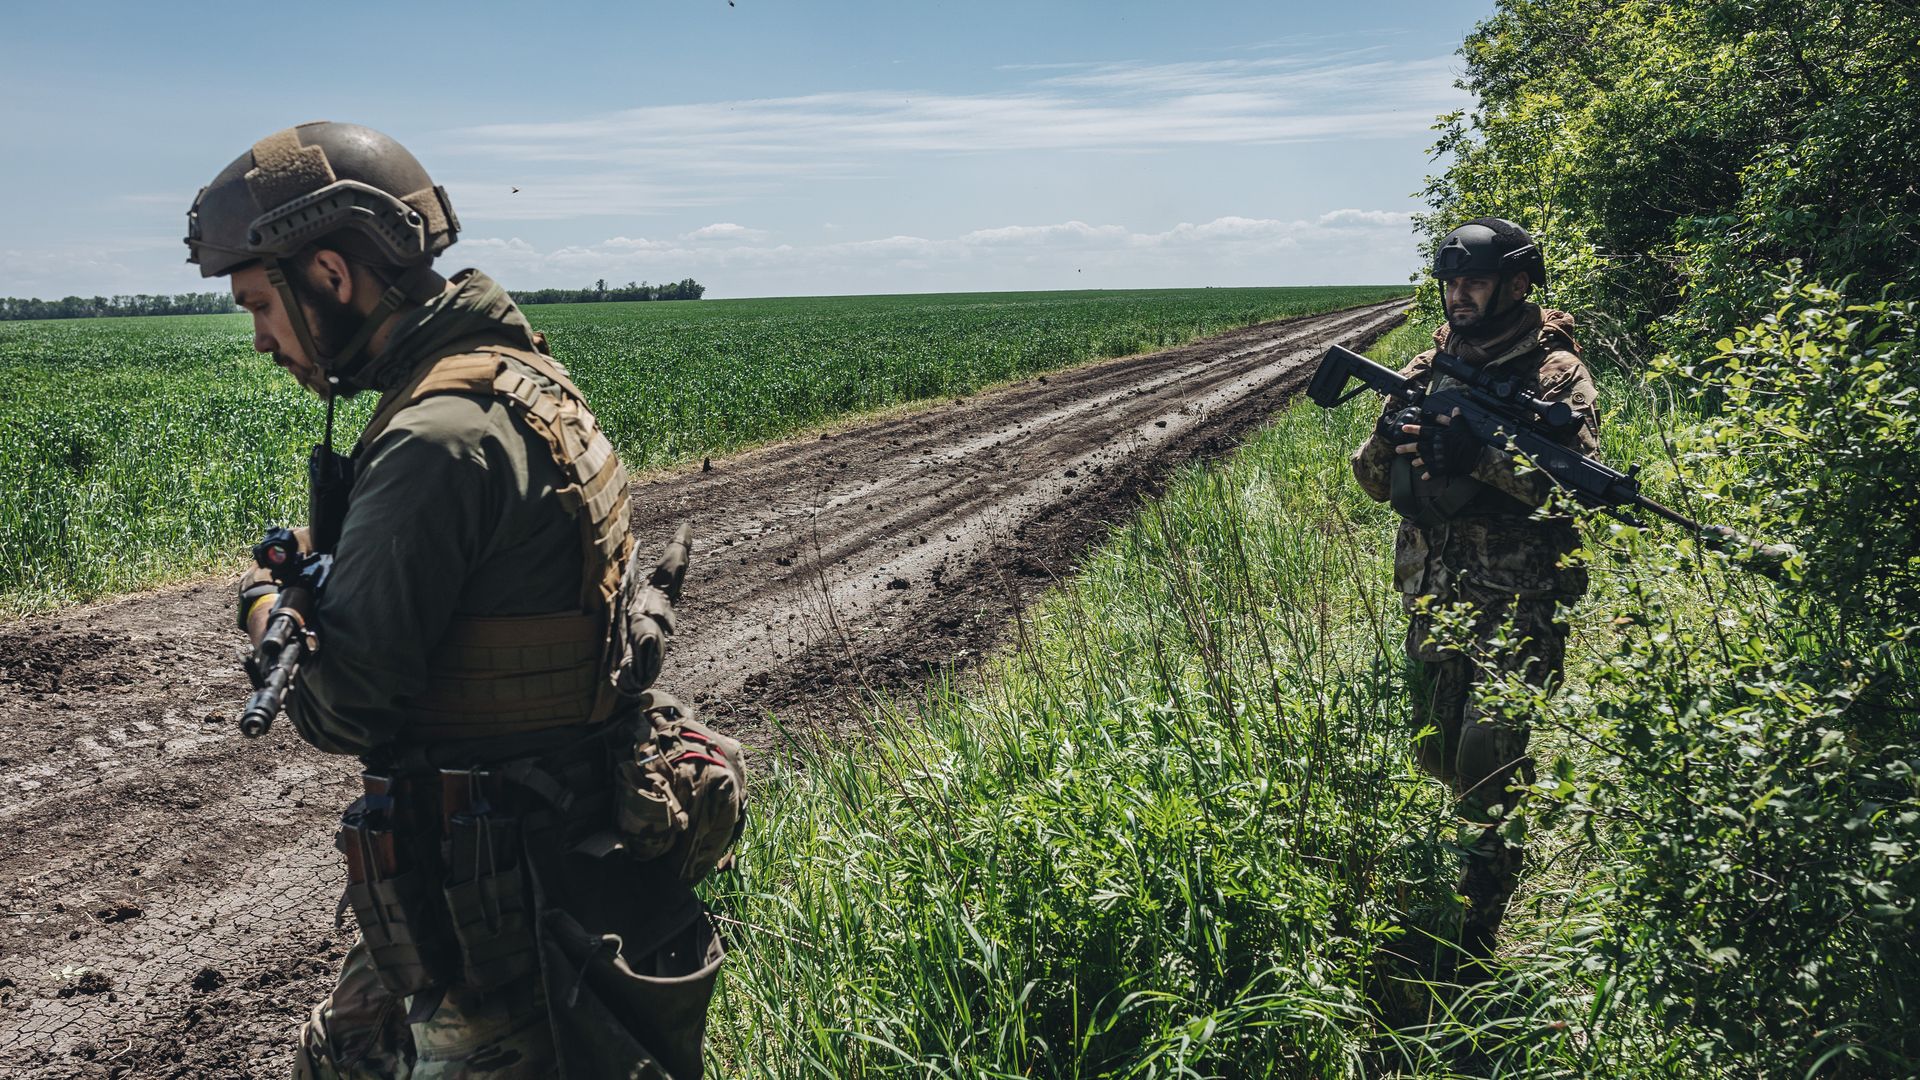 Ukrainian soldiers on the frontline in Donbass